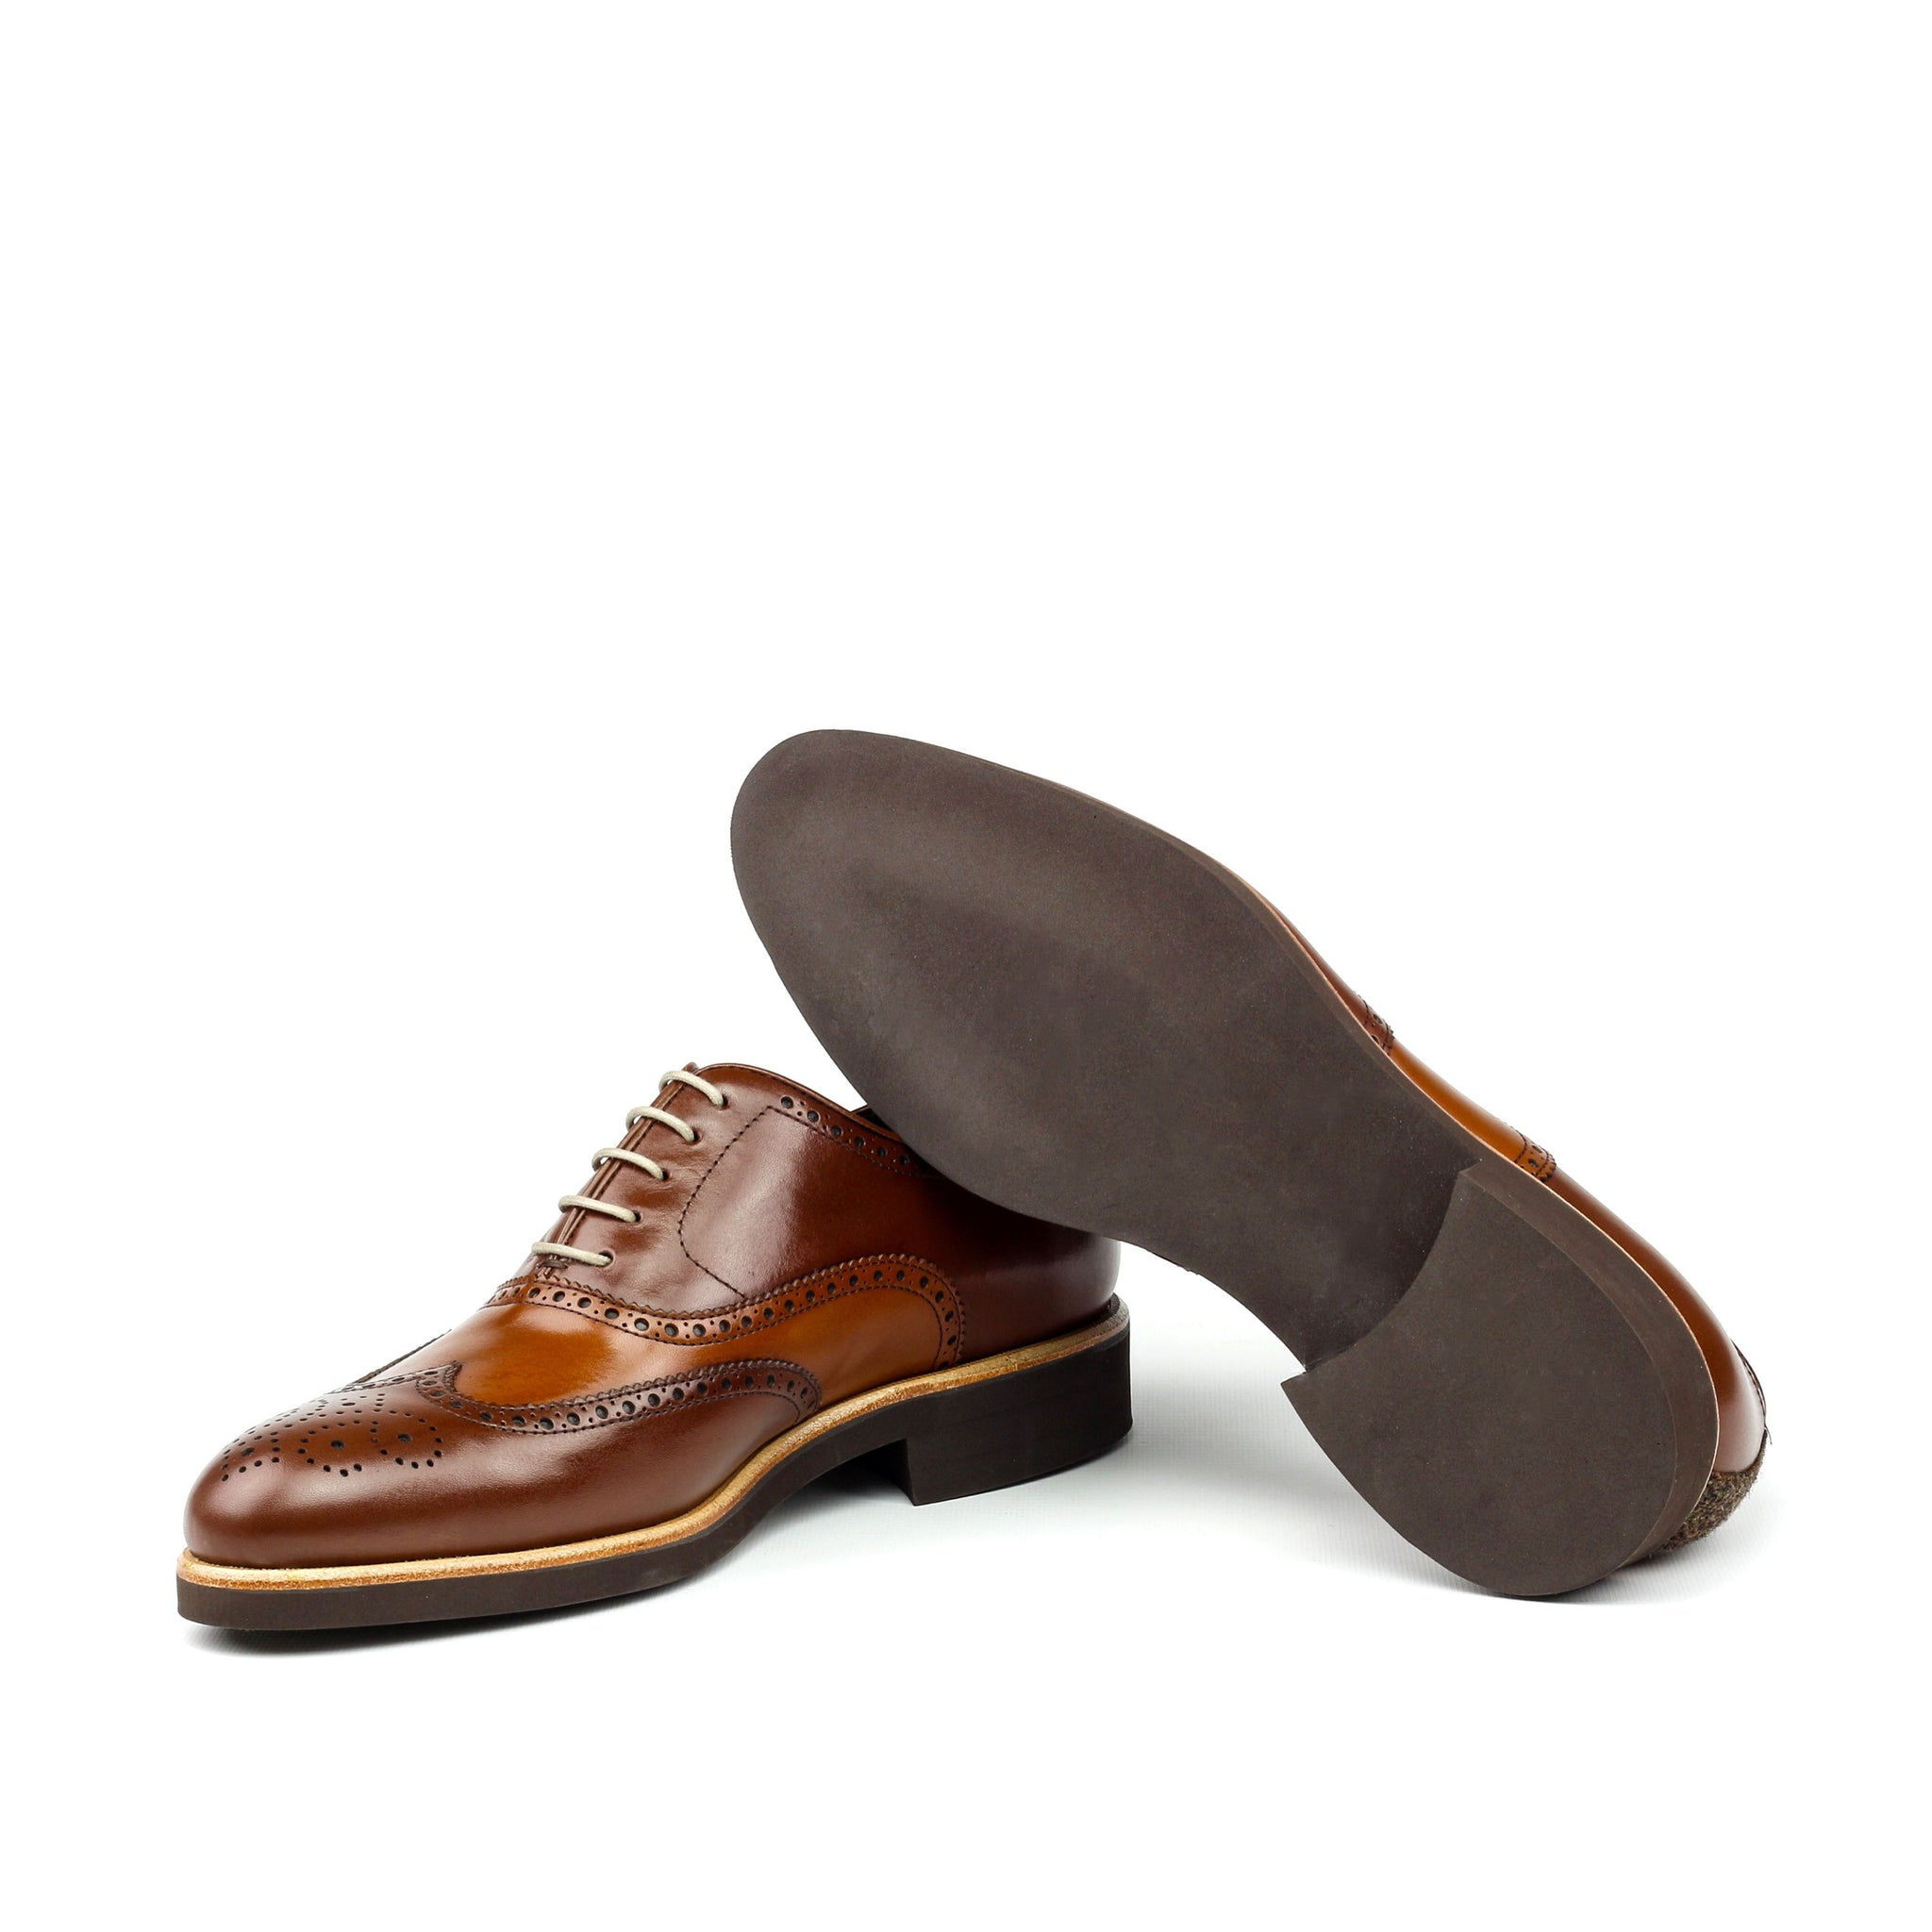 Augustus C - Unique Handcrafted Coffee Brown Brogue Classic Oxford W/ Brown Heeled Rubber Sole